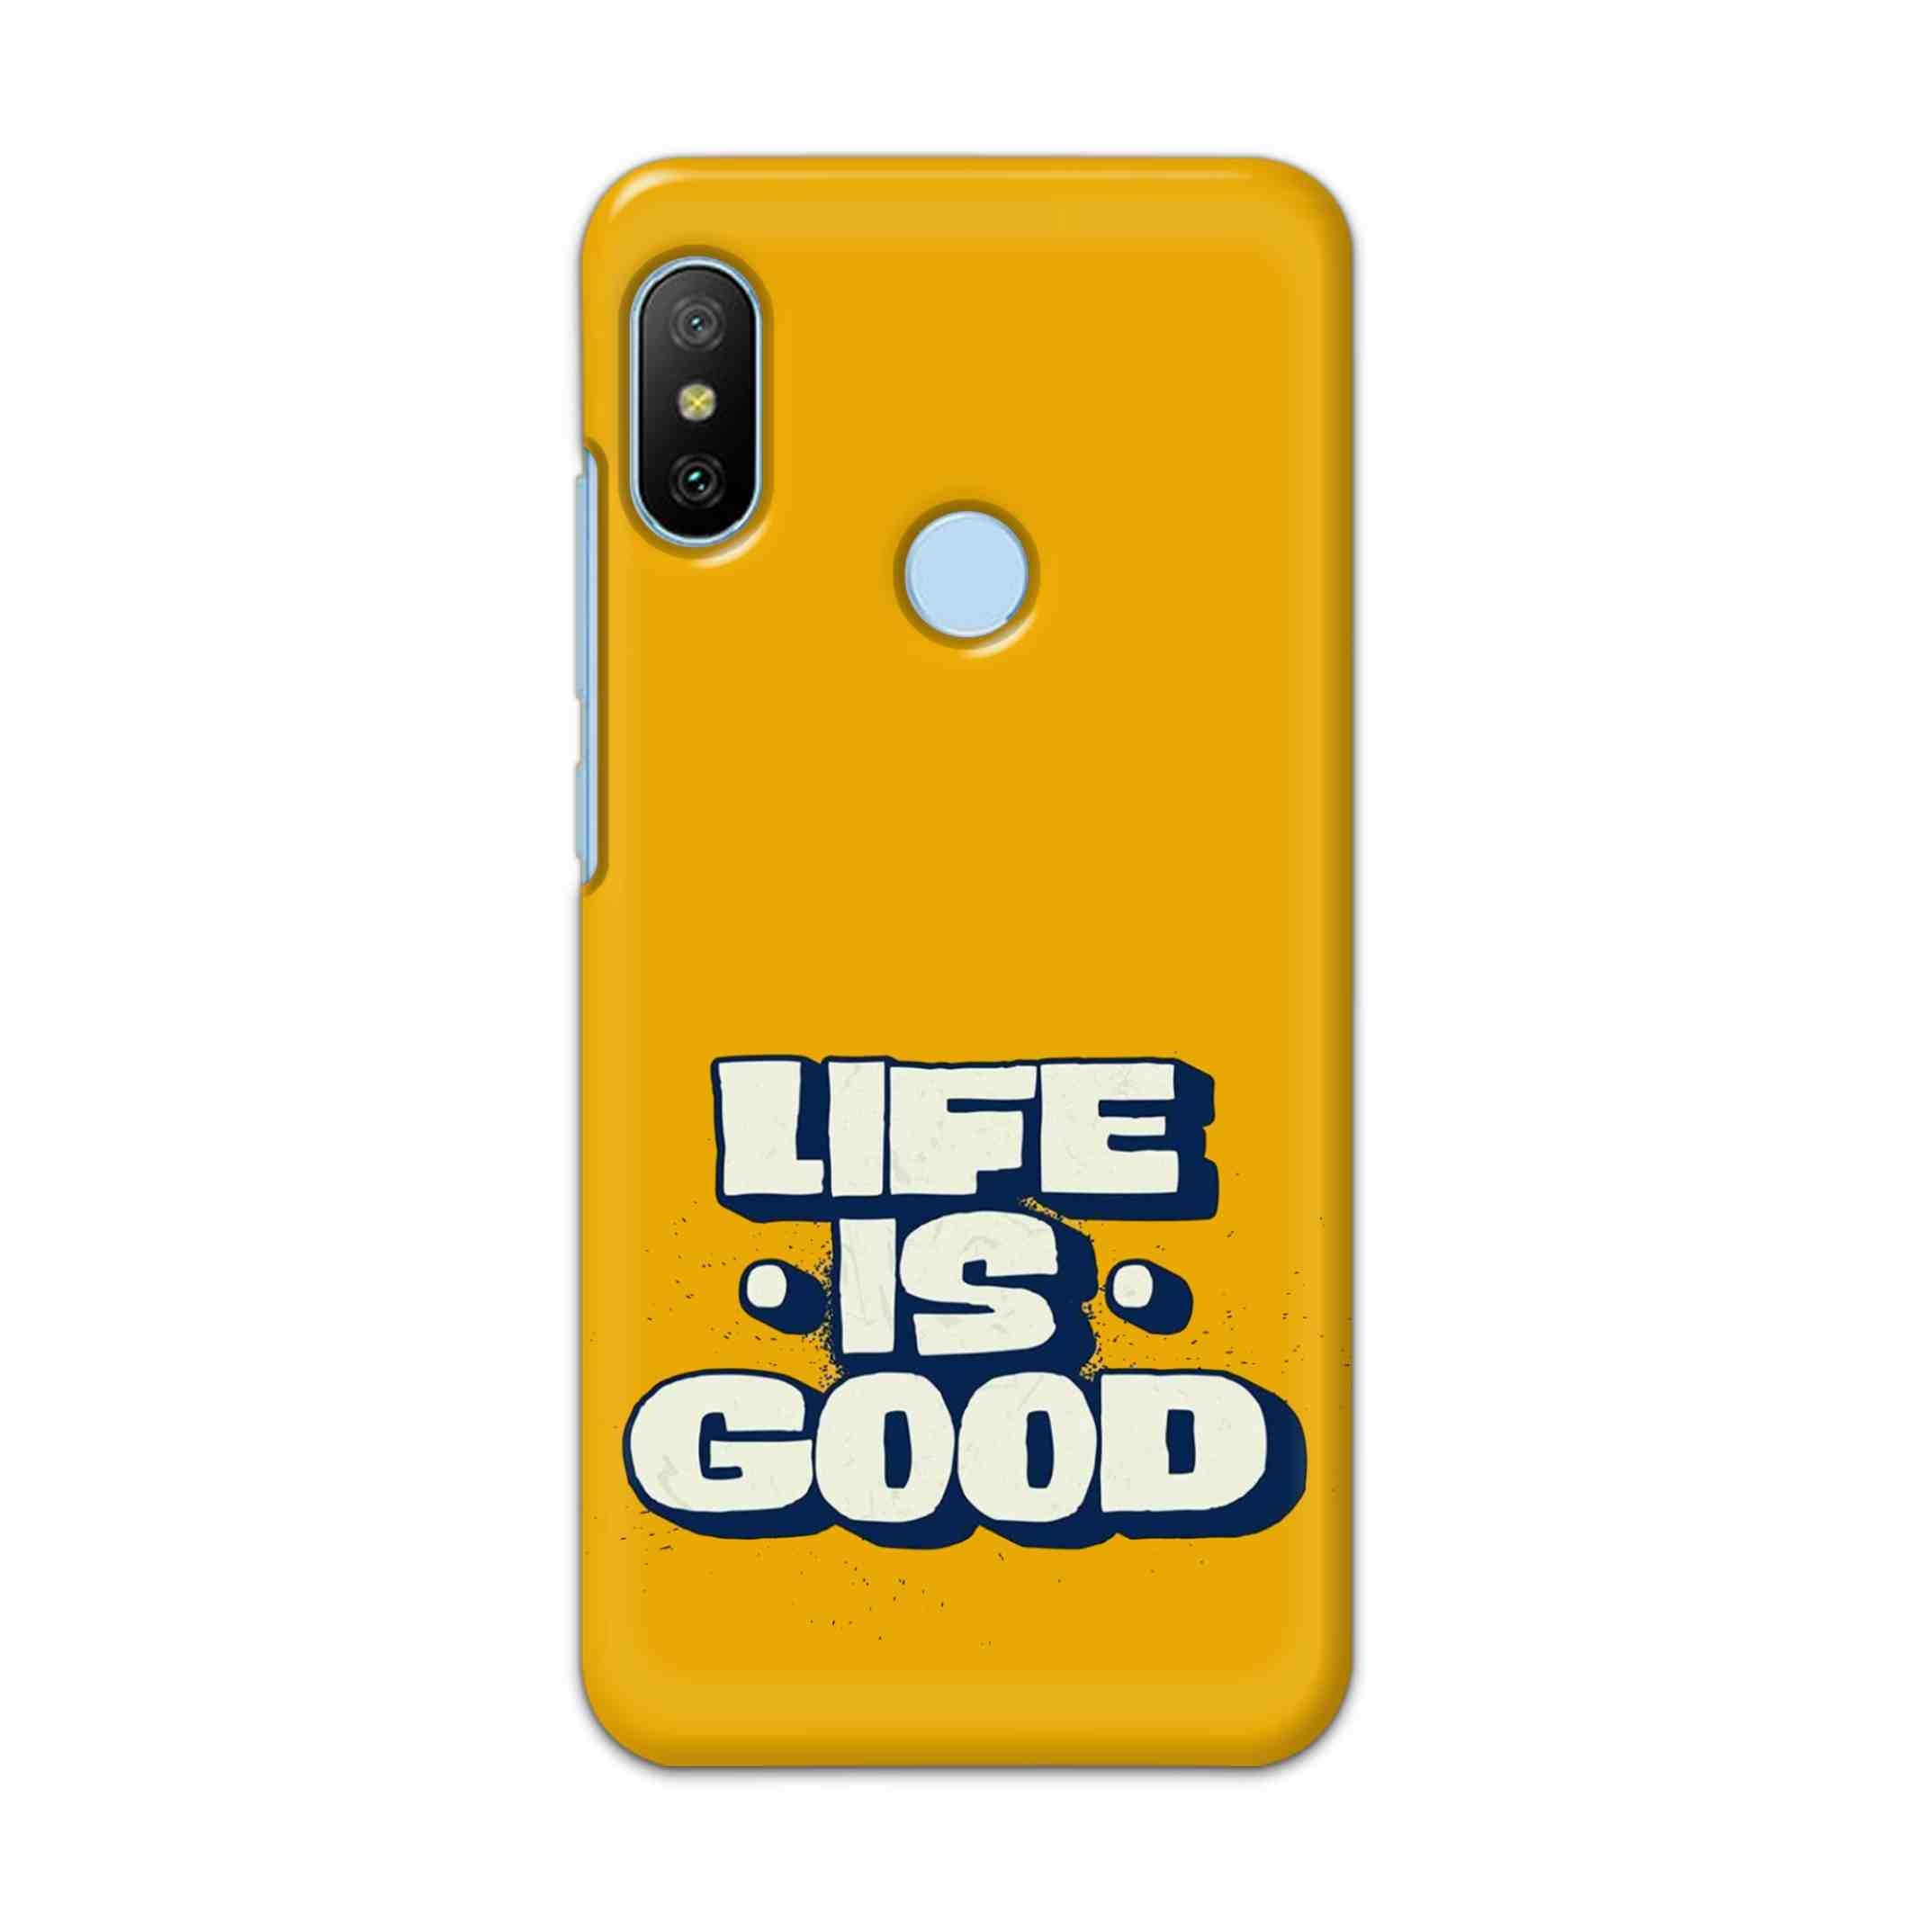 Buy Life Is Good Hard Back Mobile Phone Case/Cover For Xiaomi Redmi 6 Pro Online